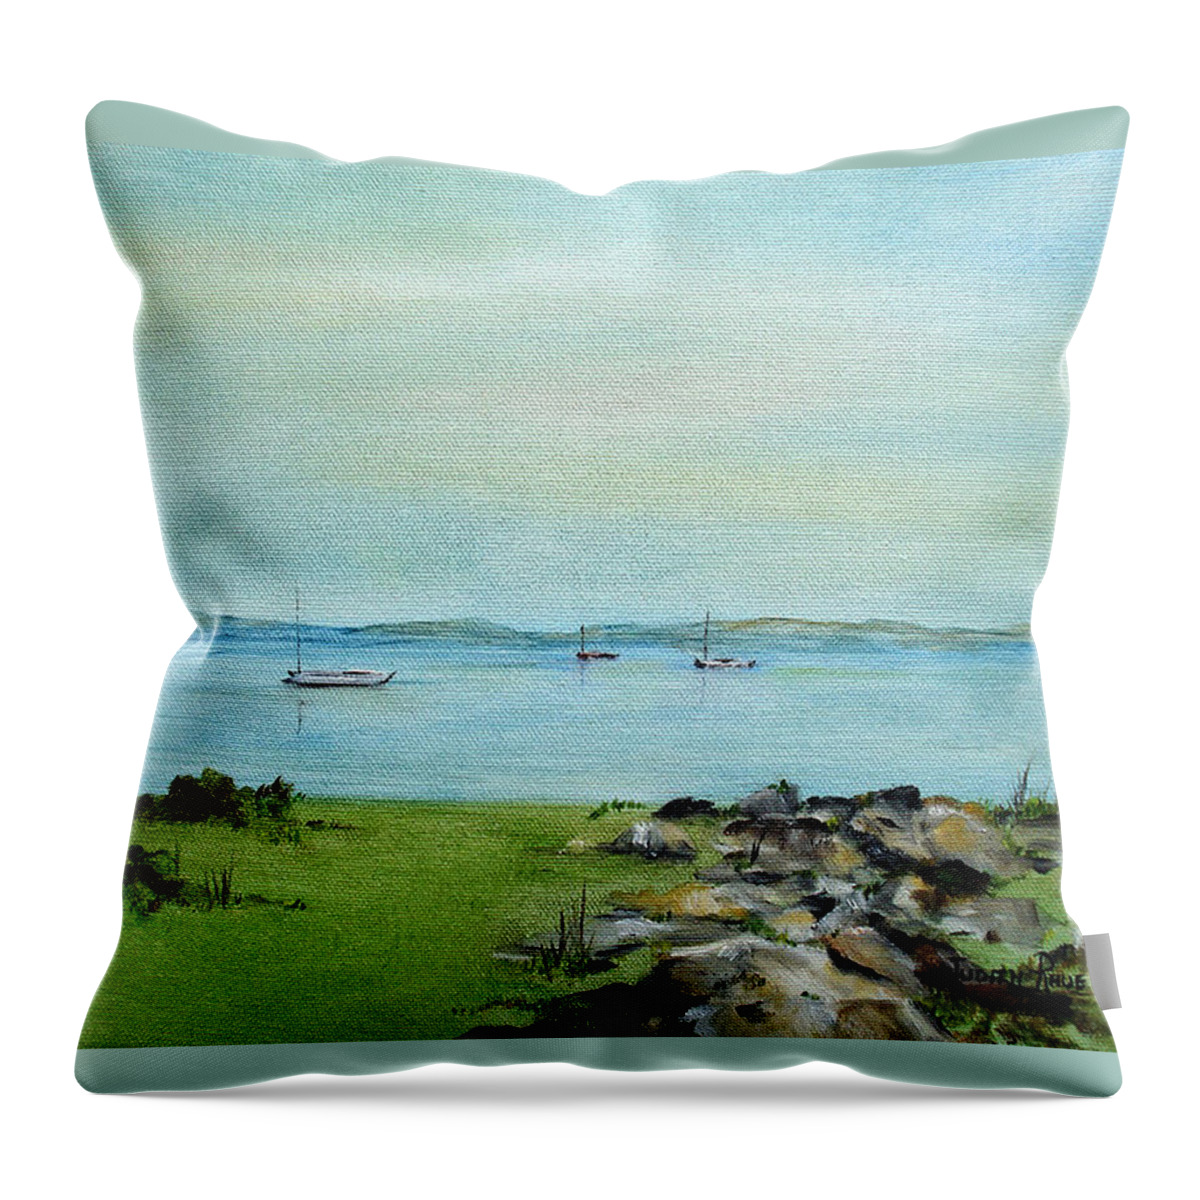 Cape Cod Throw Pillow featuring the painting Cape Cod Boats by Judith Rhue